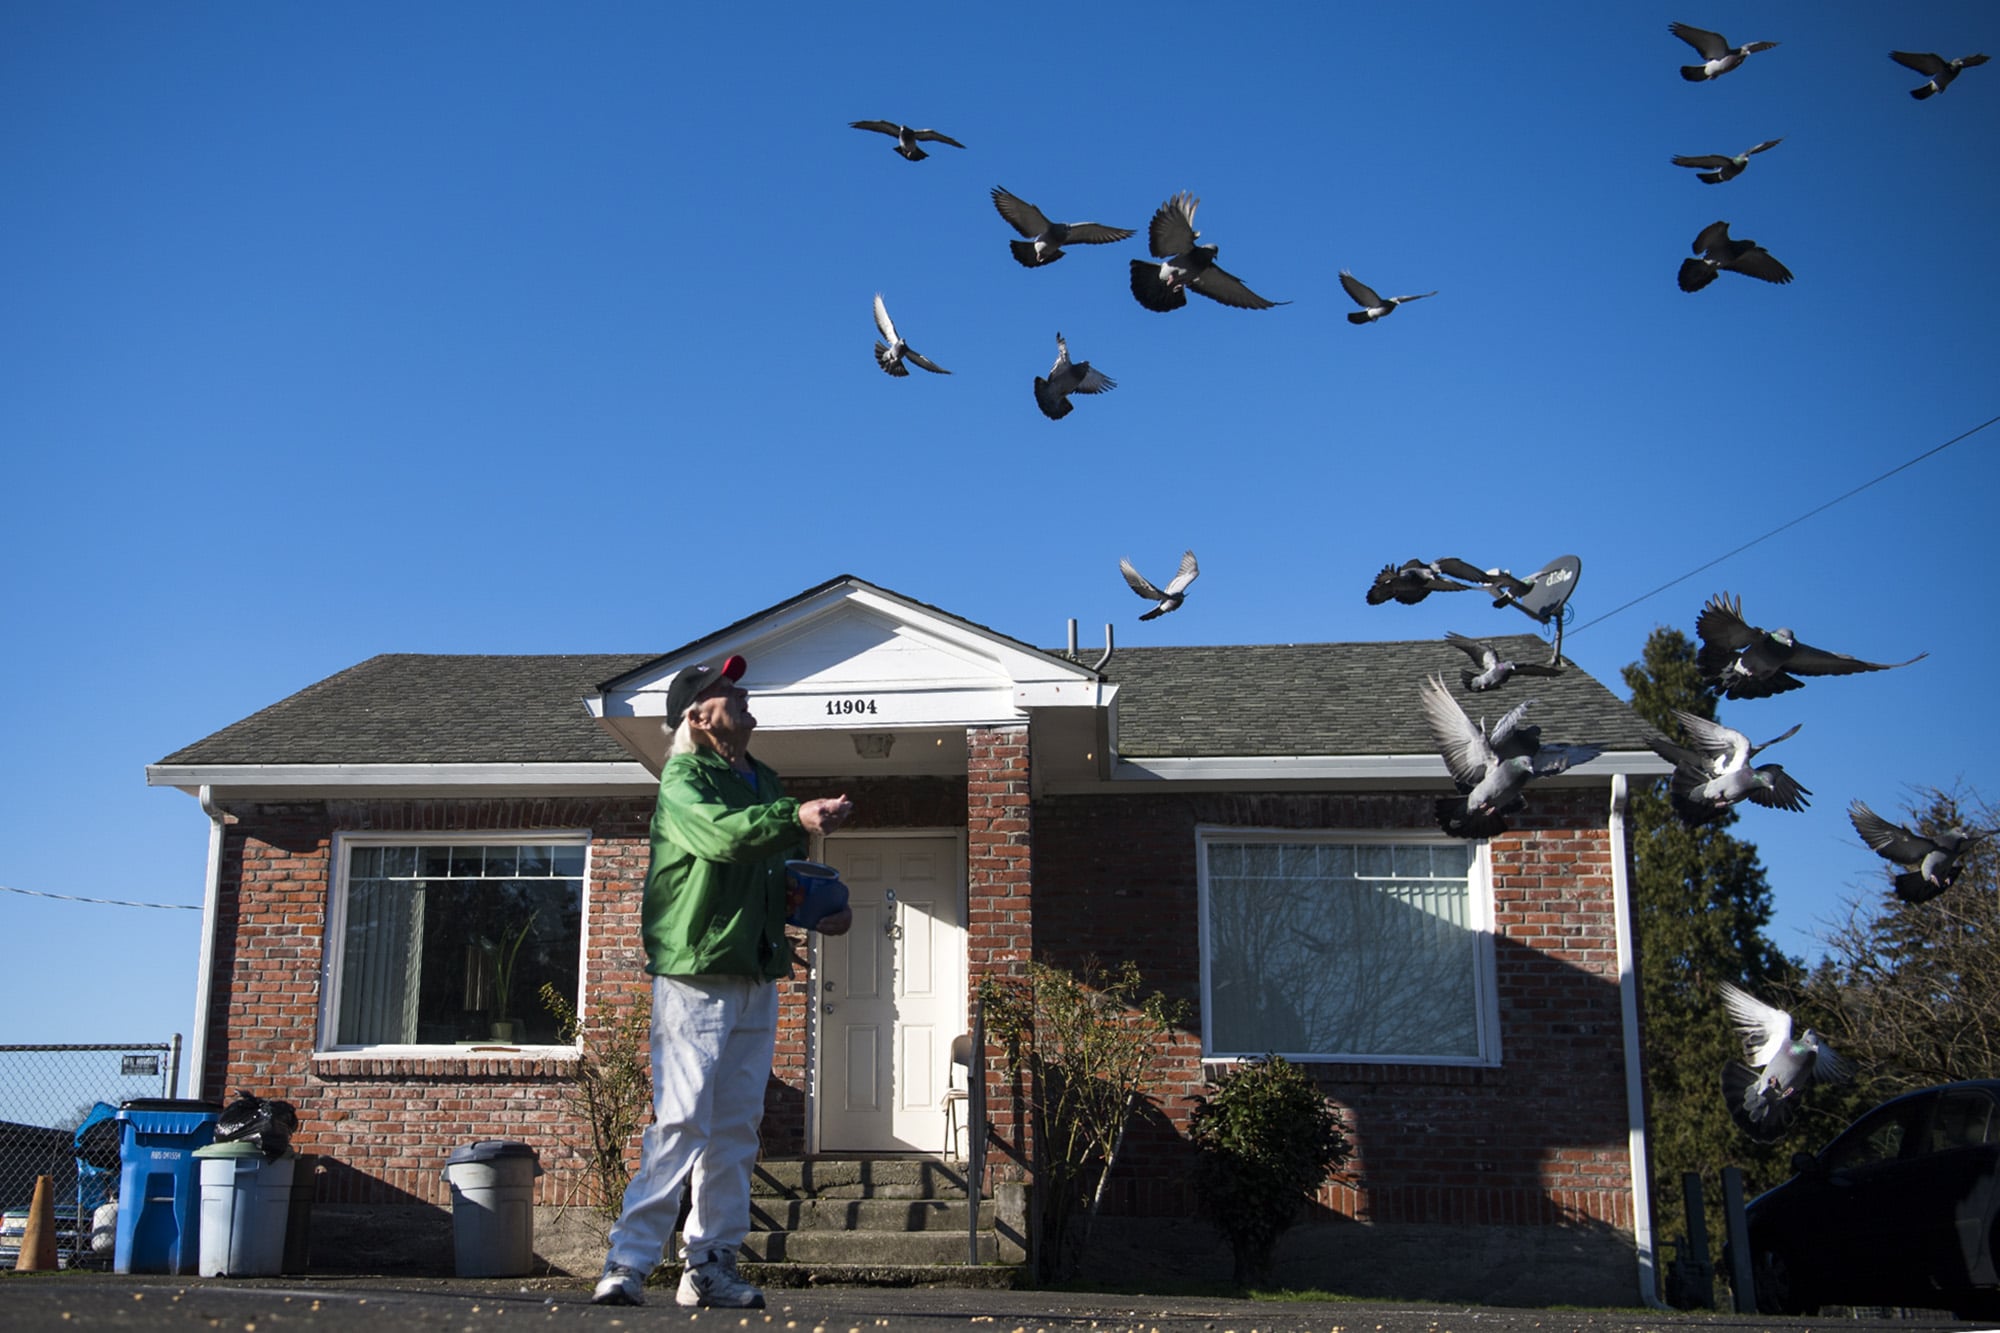 Duke Wager, 96, of Vancouver feeds pigeons outside his home in Vancouver on Monday. Wager started raising pigeons with his dad when he was 10 years old, and carried on the hobby for more than 60 years. He even participated in pigeon racing for a time in his later years.